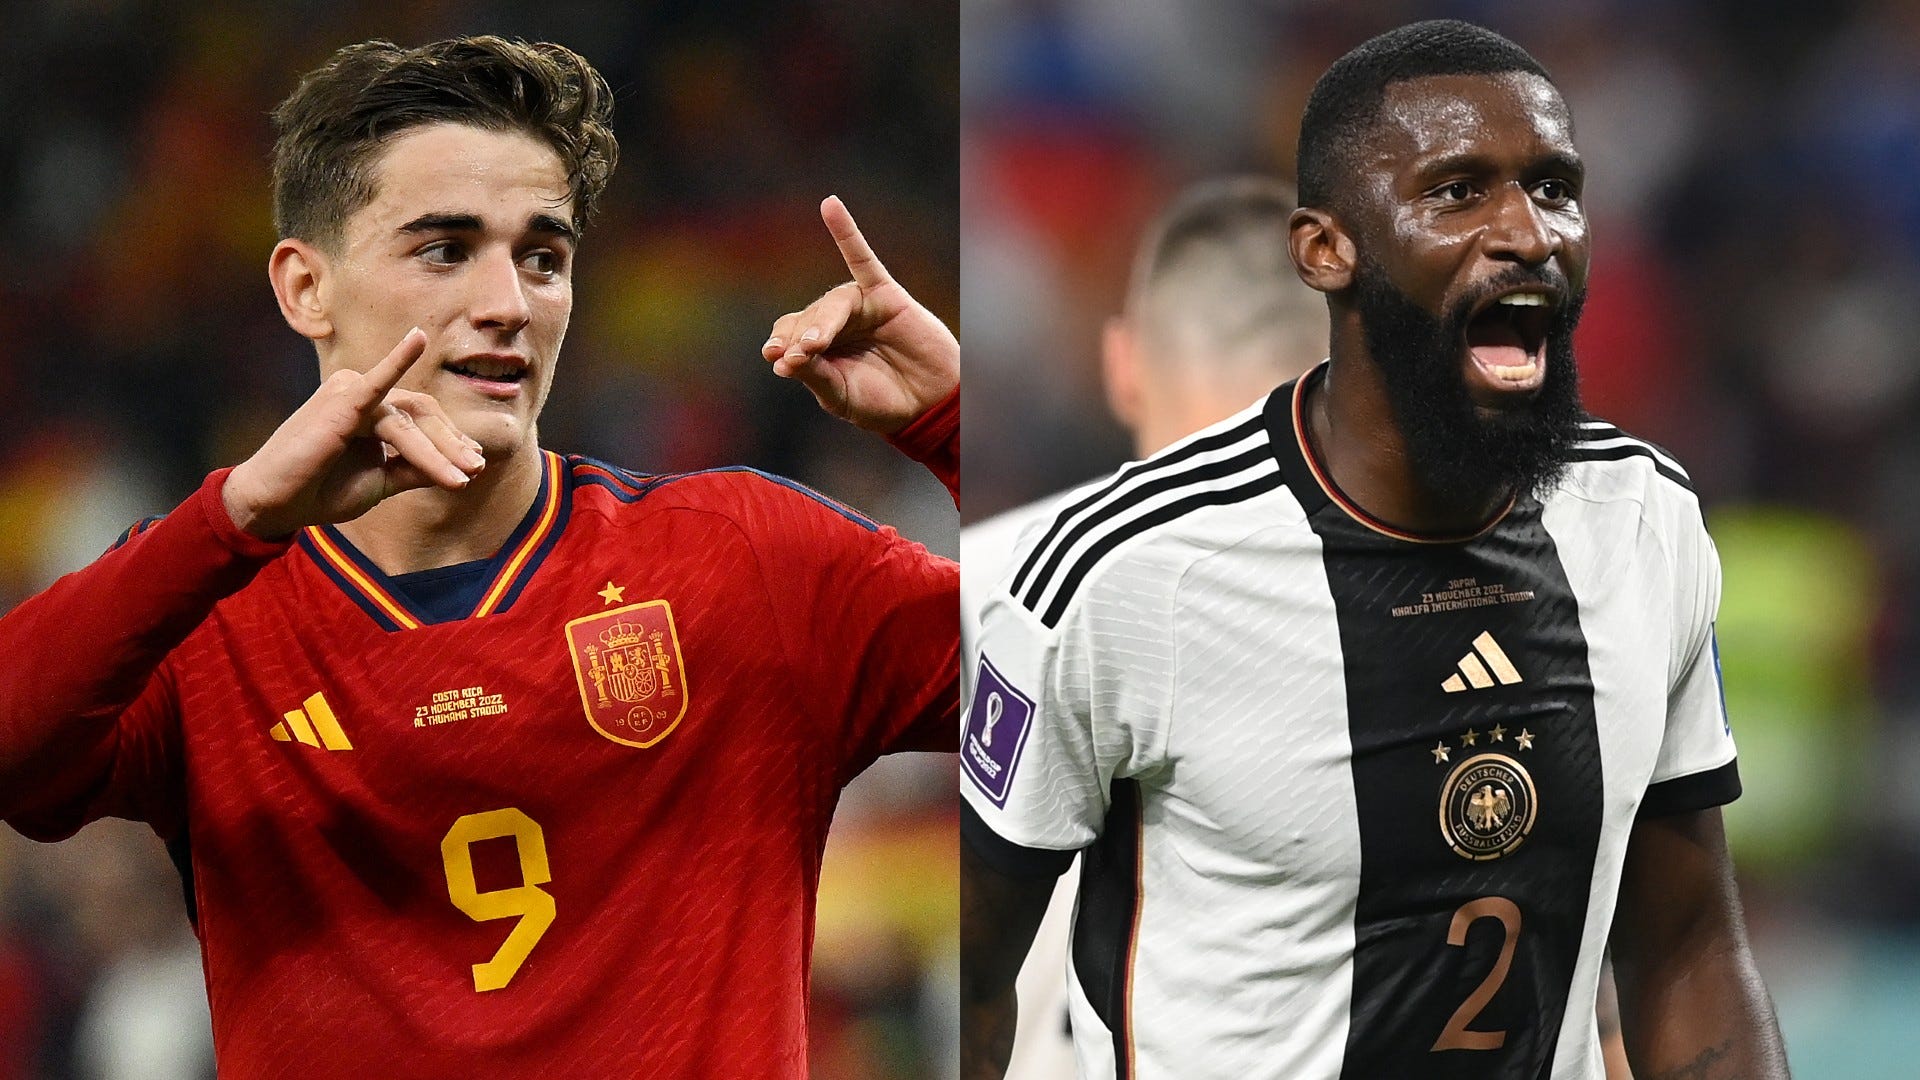 Spain vs Germany Live stream, TV channel, kick-off time and where to watch Goal US